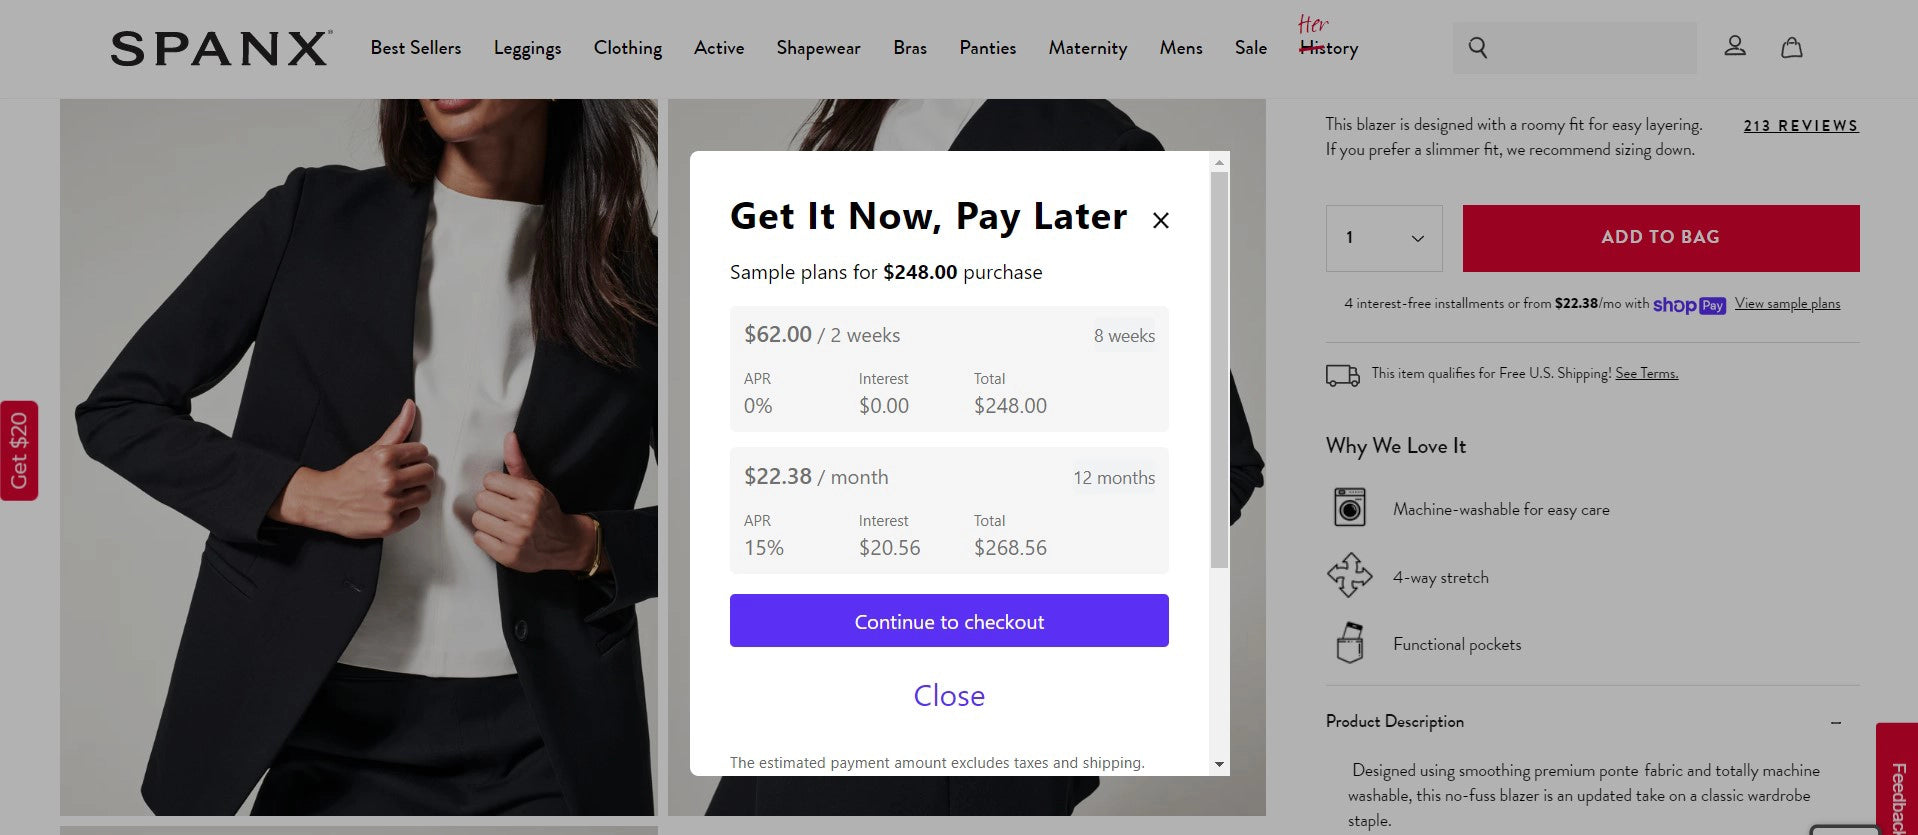 Spanx’s product page with the Shop Pay option